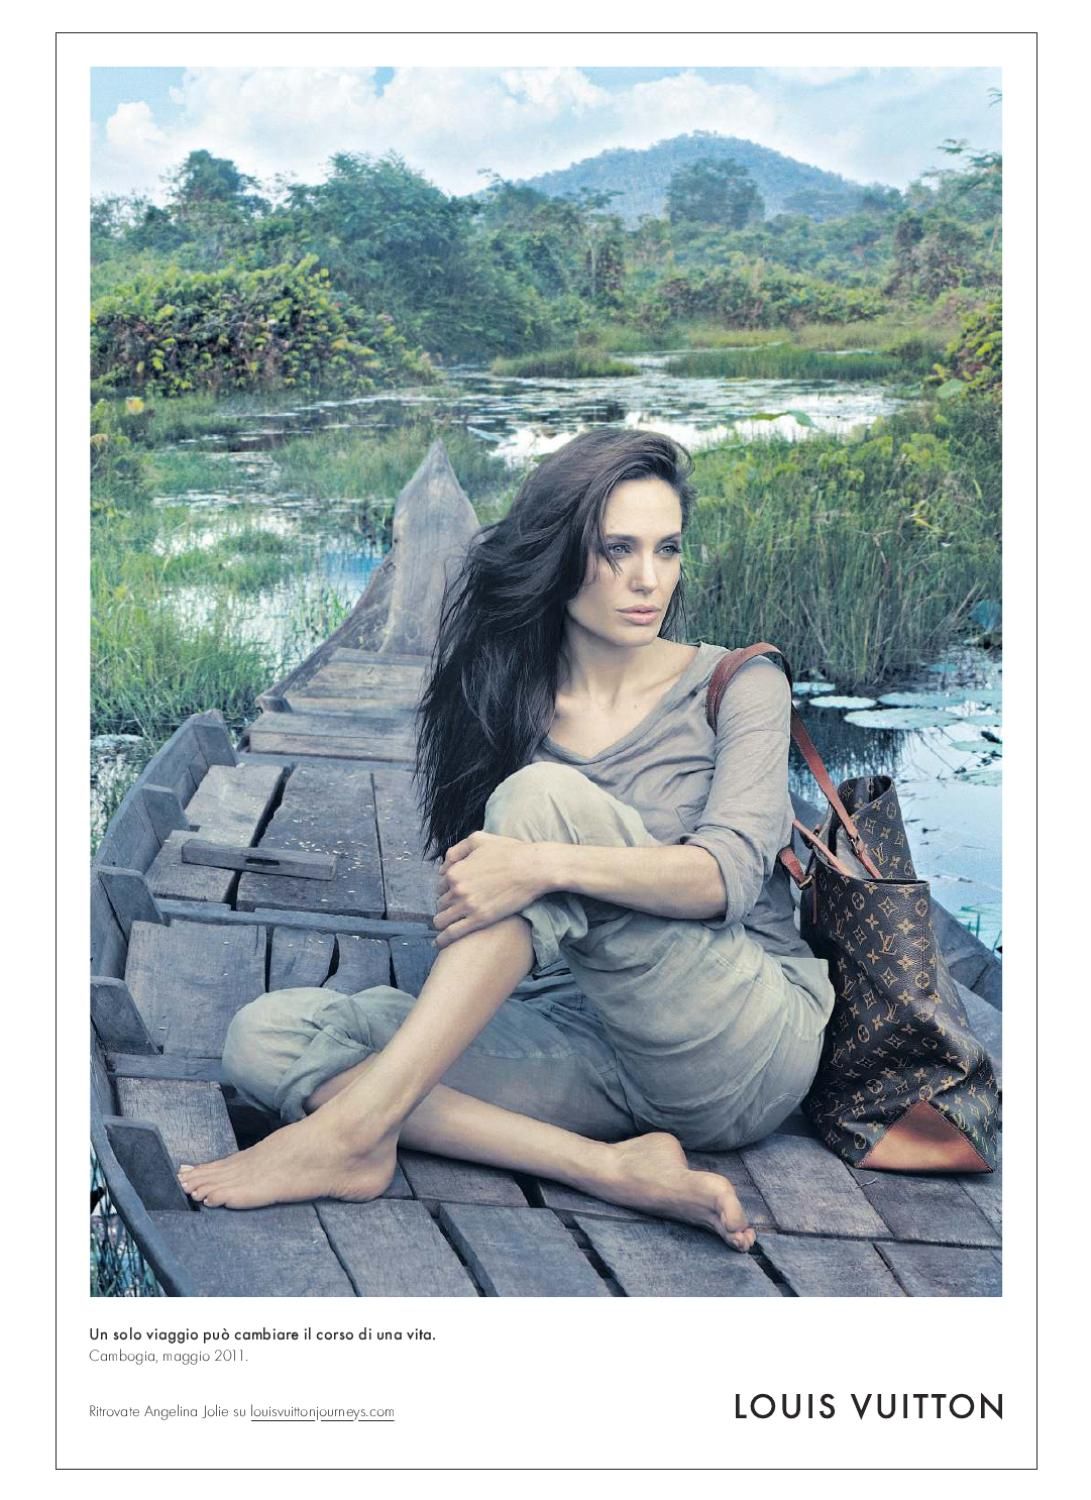 the Morning Magazine: CAMPAIGN. Louis Vuitton - Angelina Jolie